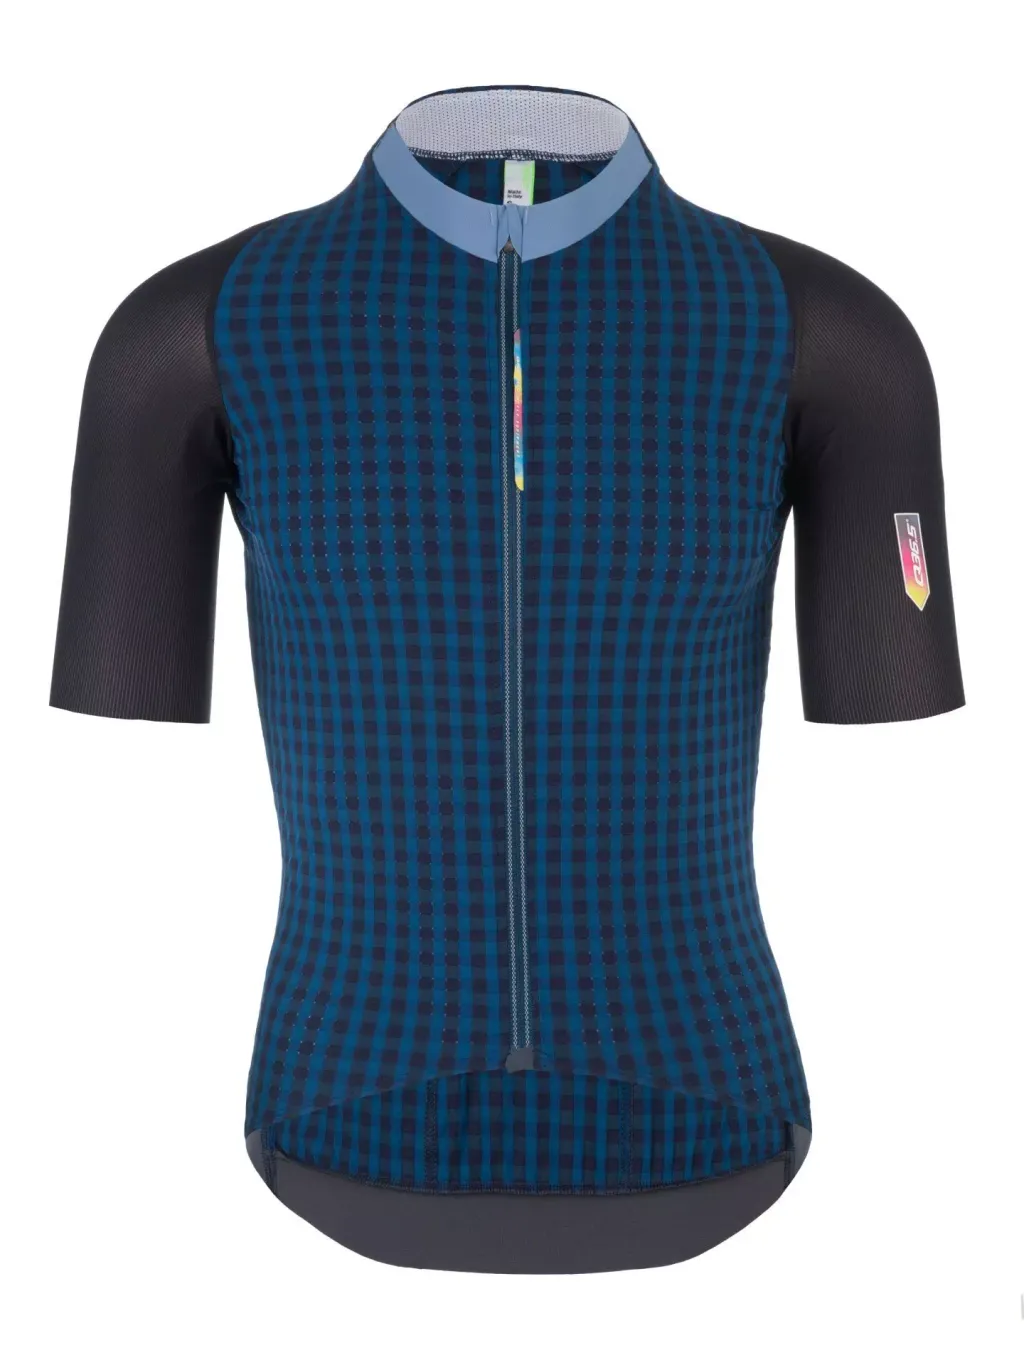 mens_jersey_clima_navy_035.9_front-2_1920x1920